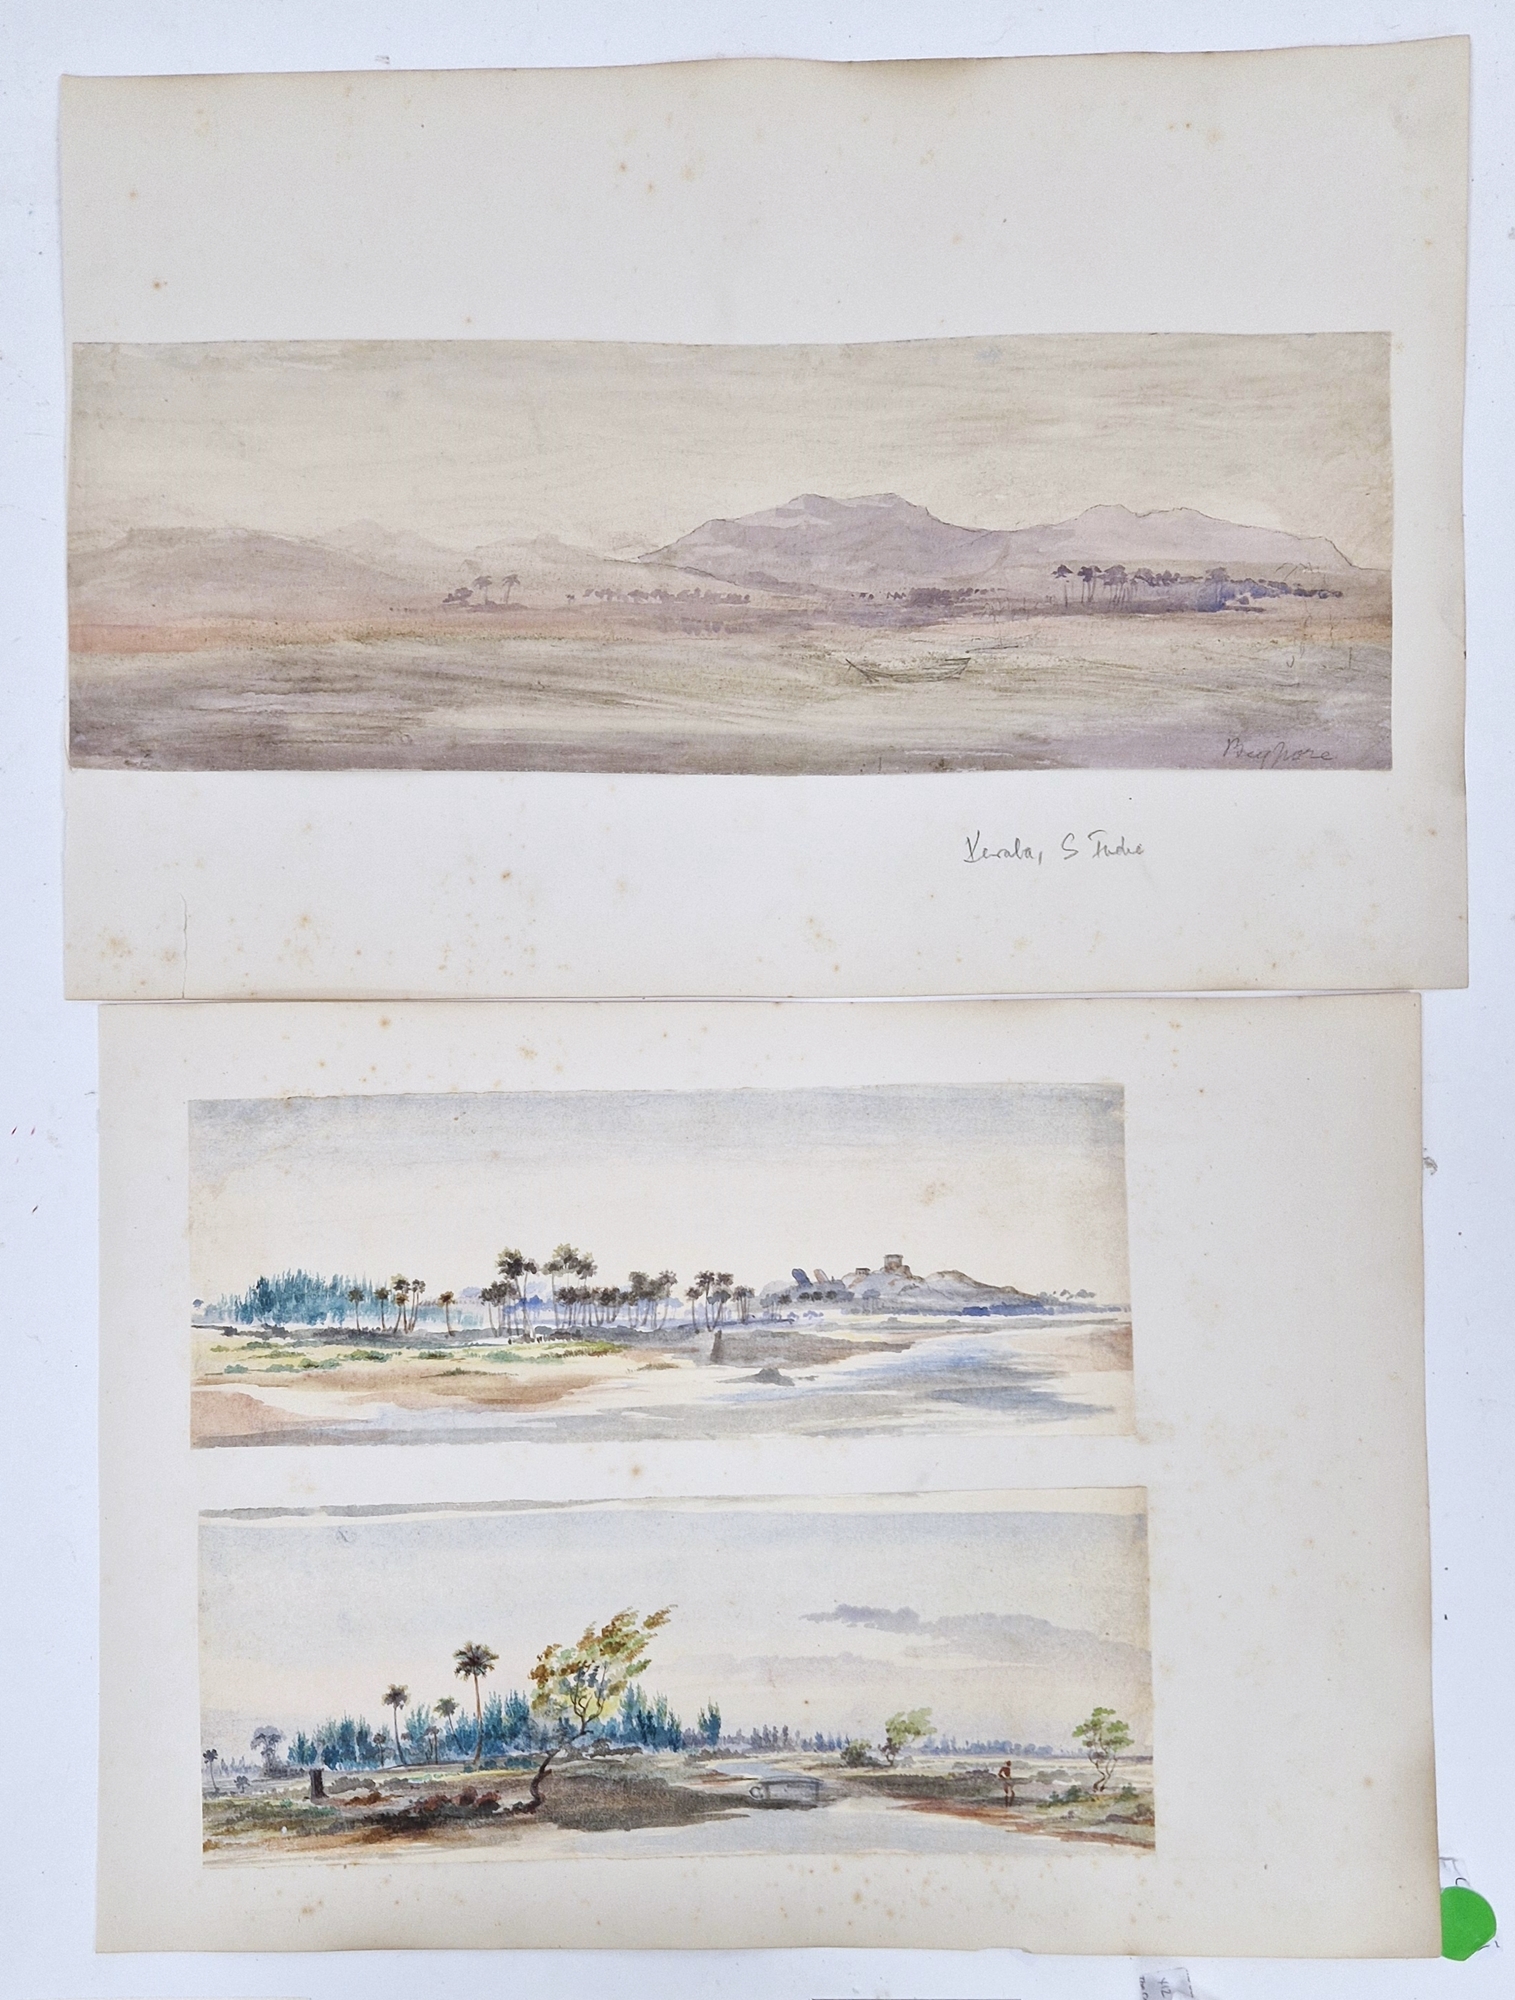 Watercolour drawings - collection Attrib. A H. Walter " A Passage from India to England 1873" - Image 4 of 13